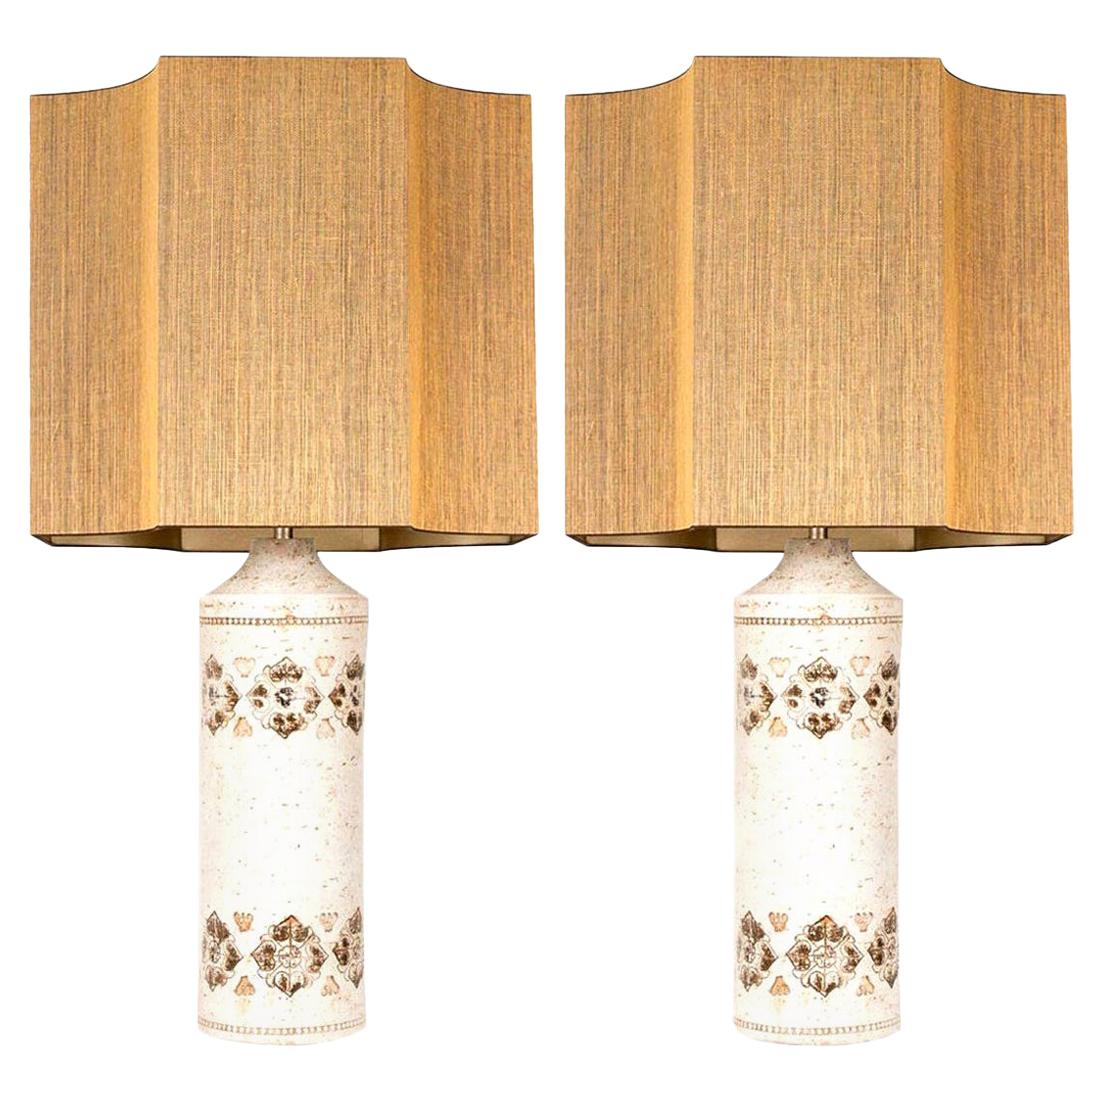 Pair of Bitossi Lamps for Bergboms, with Custom Made Shades by Rene Houben